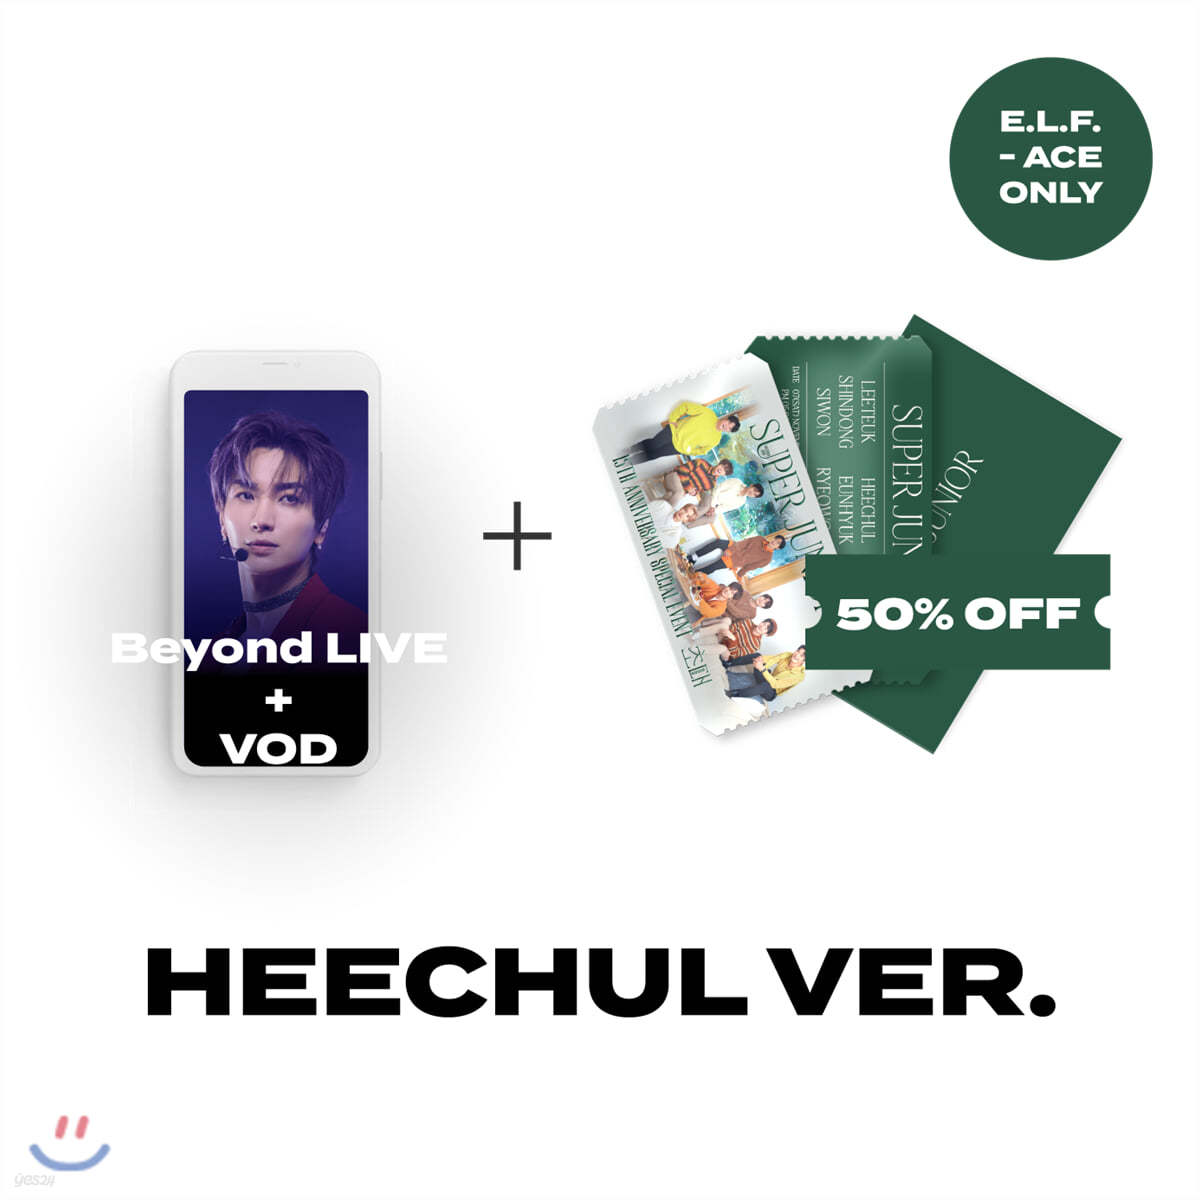 [E.L.F. ACE ONLY] [HEECHUL] Beyond LIVE + VOD관람권 + POP-UP CARD + AR TICKET SET- SUPER JUNIOR 15th Anniversary Special Event - 초대(Invitation)